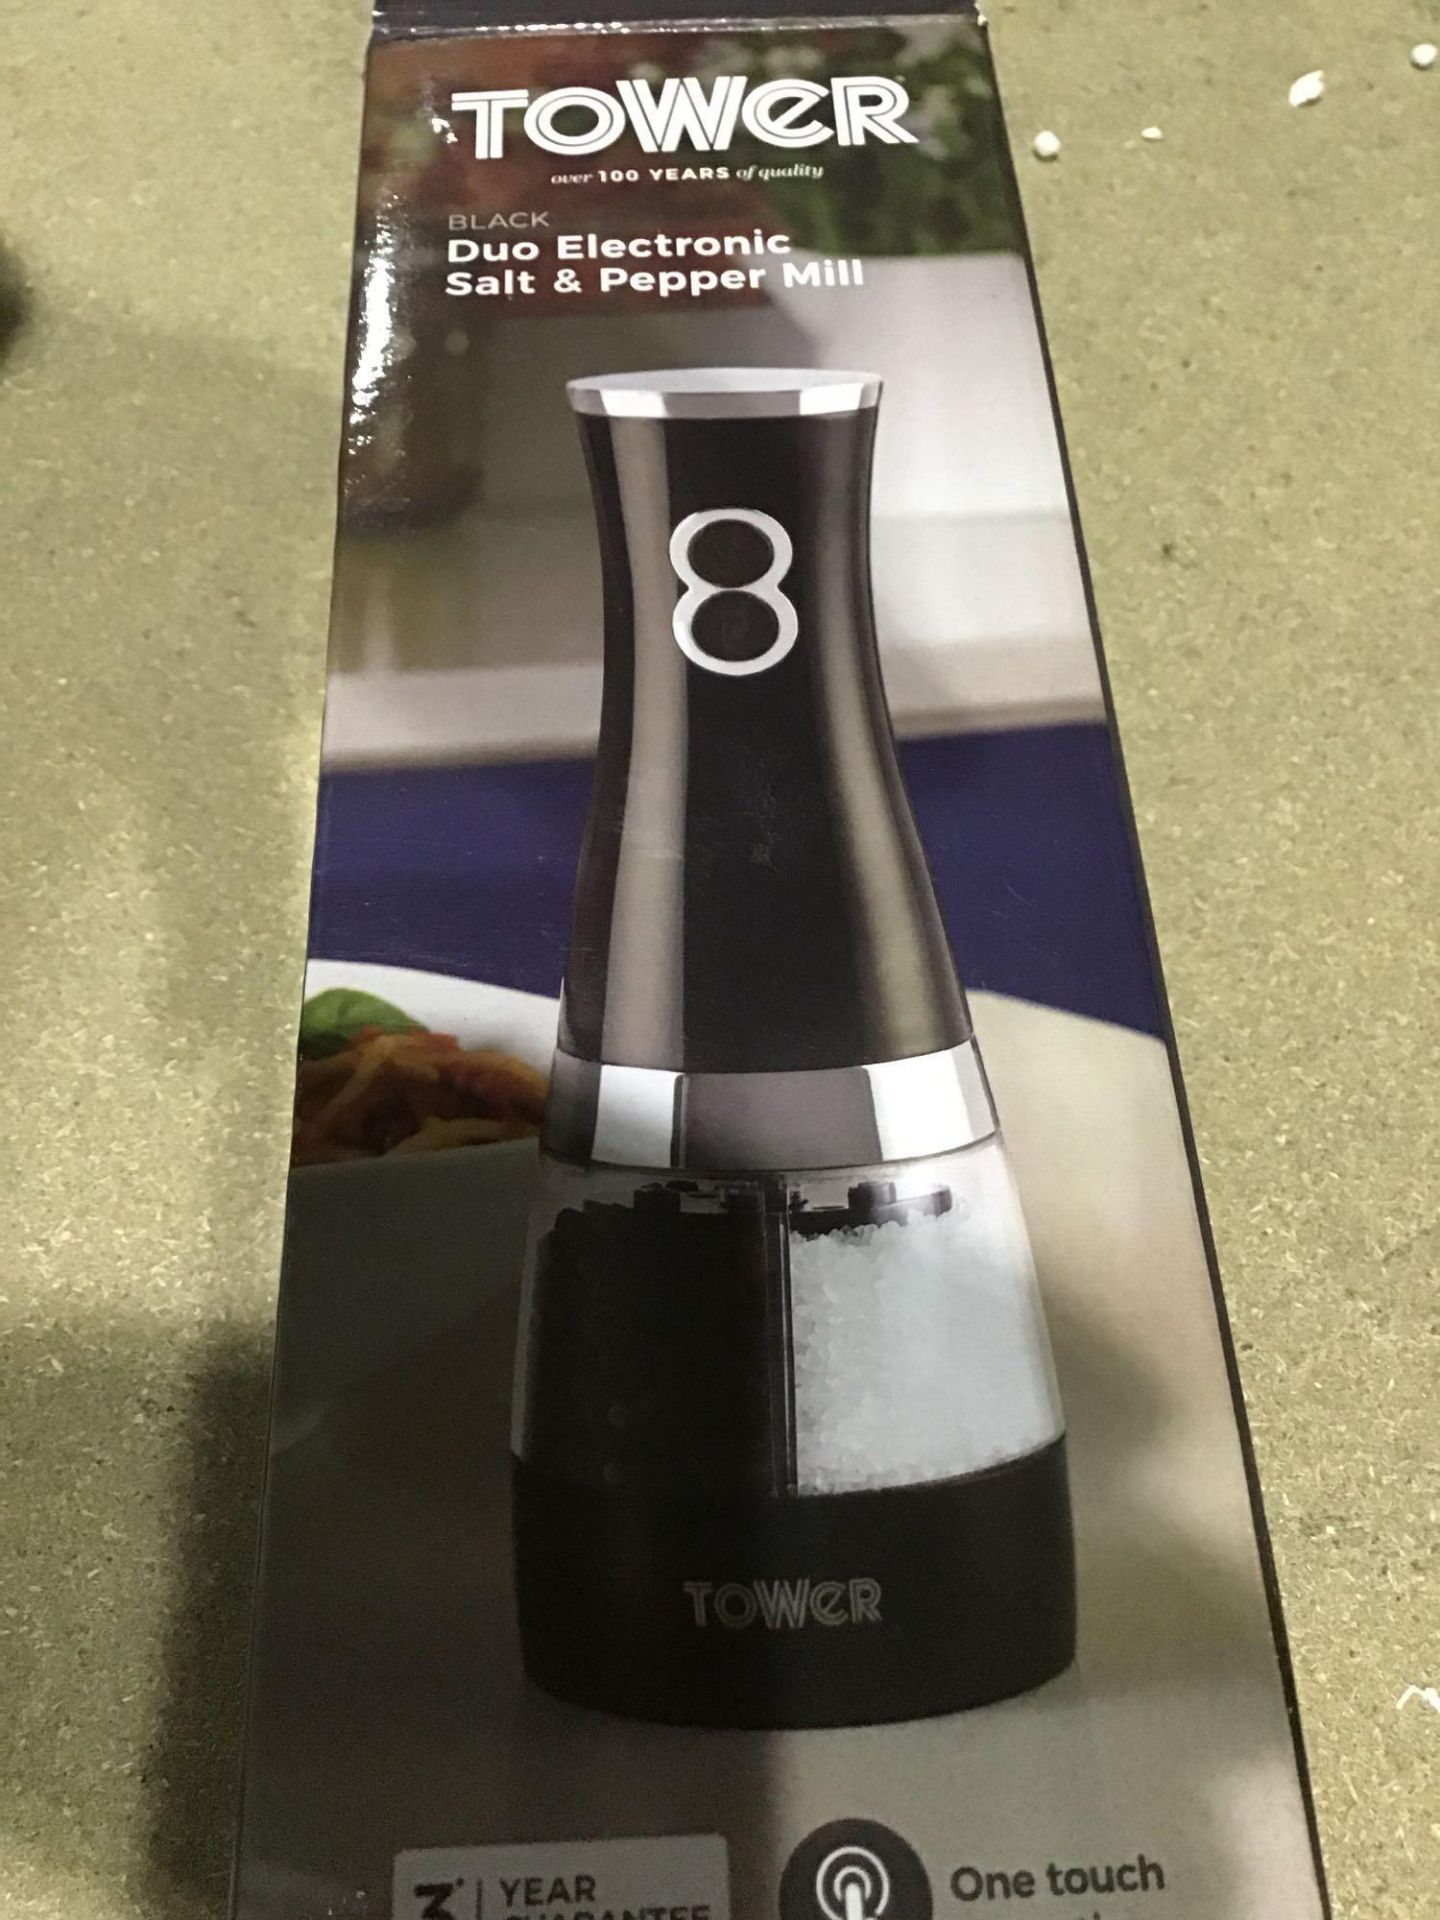 Tower Electric Duo Salt and Pepper Mill, Black £11.95 RRP - Image 3 of 4